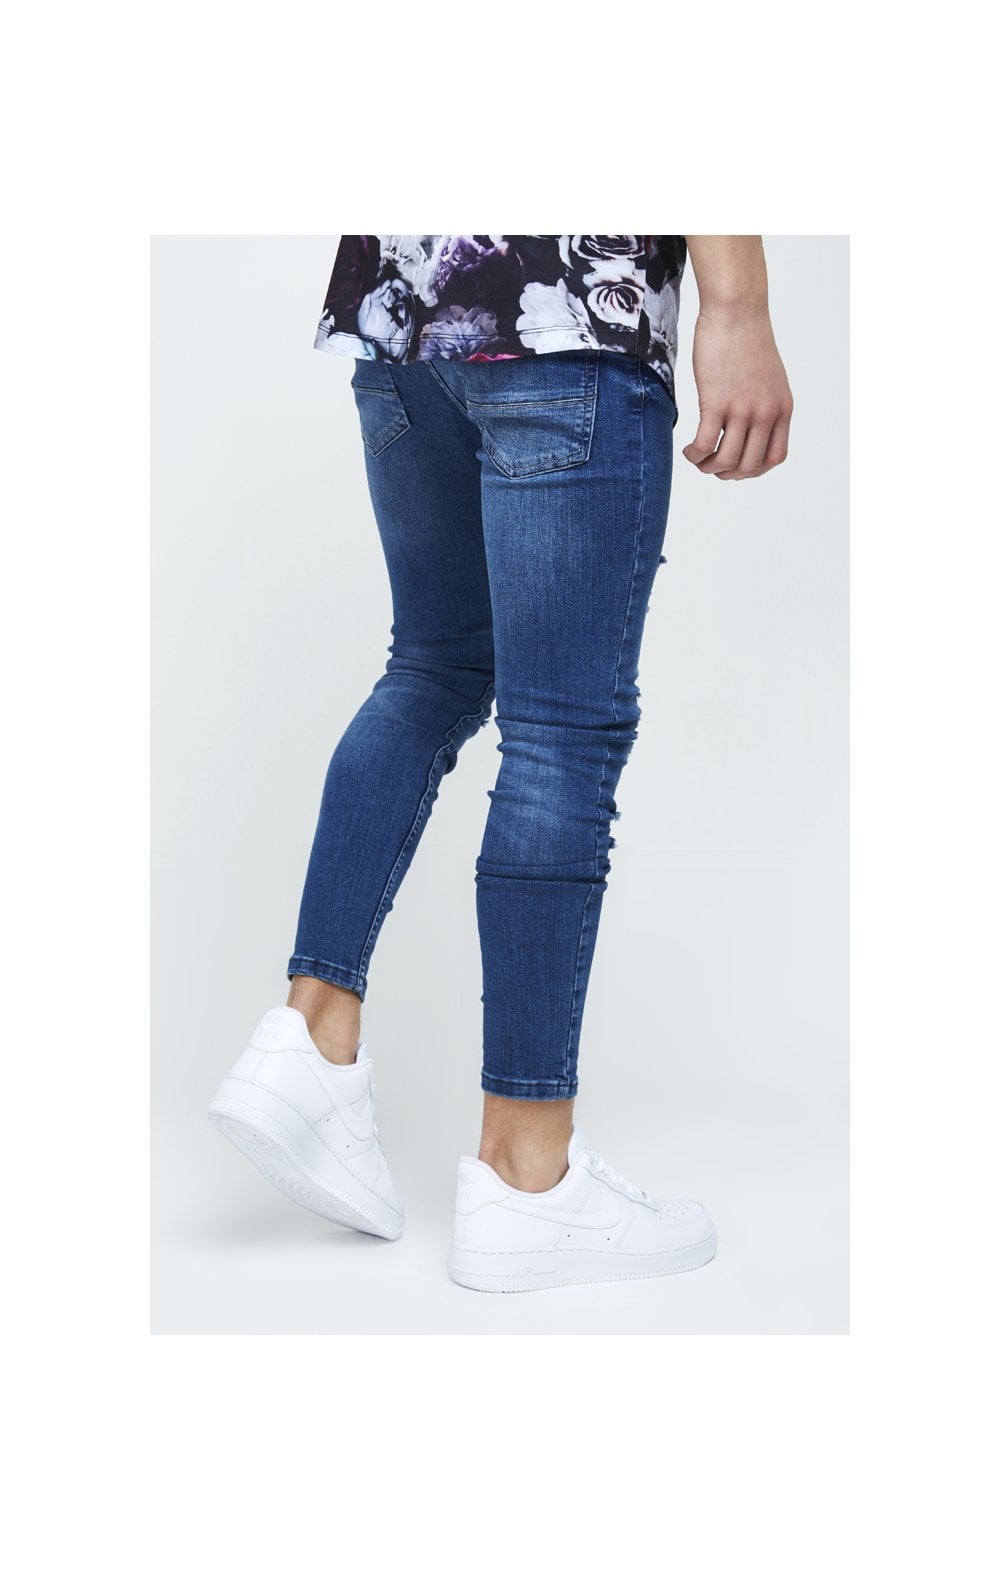 Load image into Gallery viewer, Illusive London Skinny Distressed Denims - Mid-Stone Blue (2)